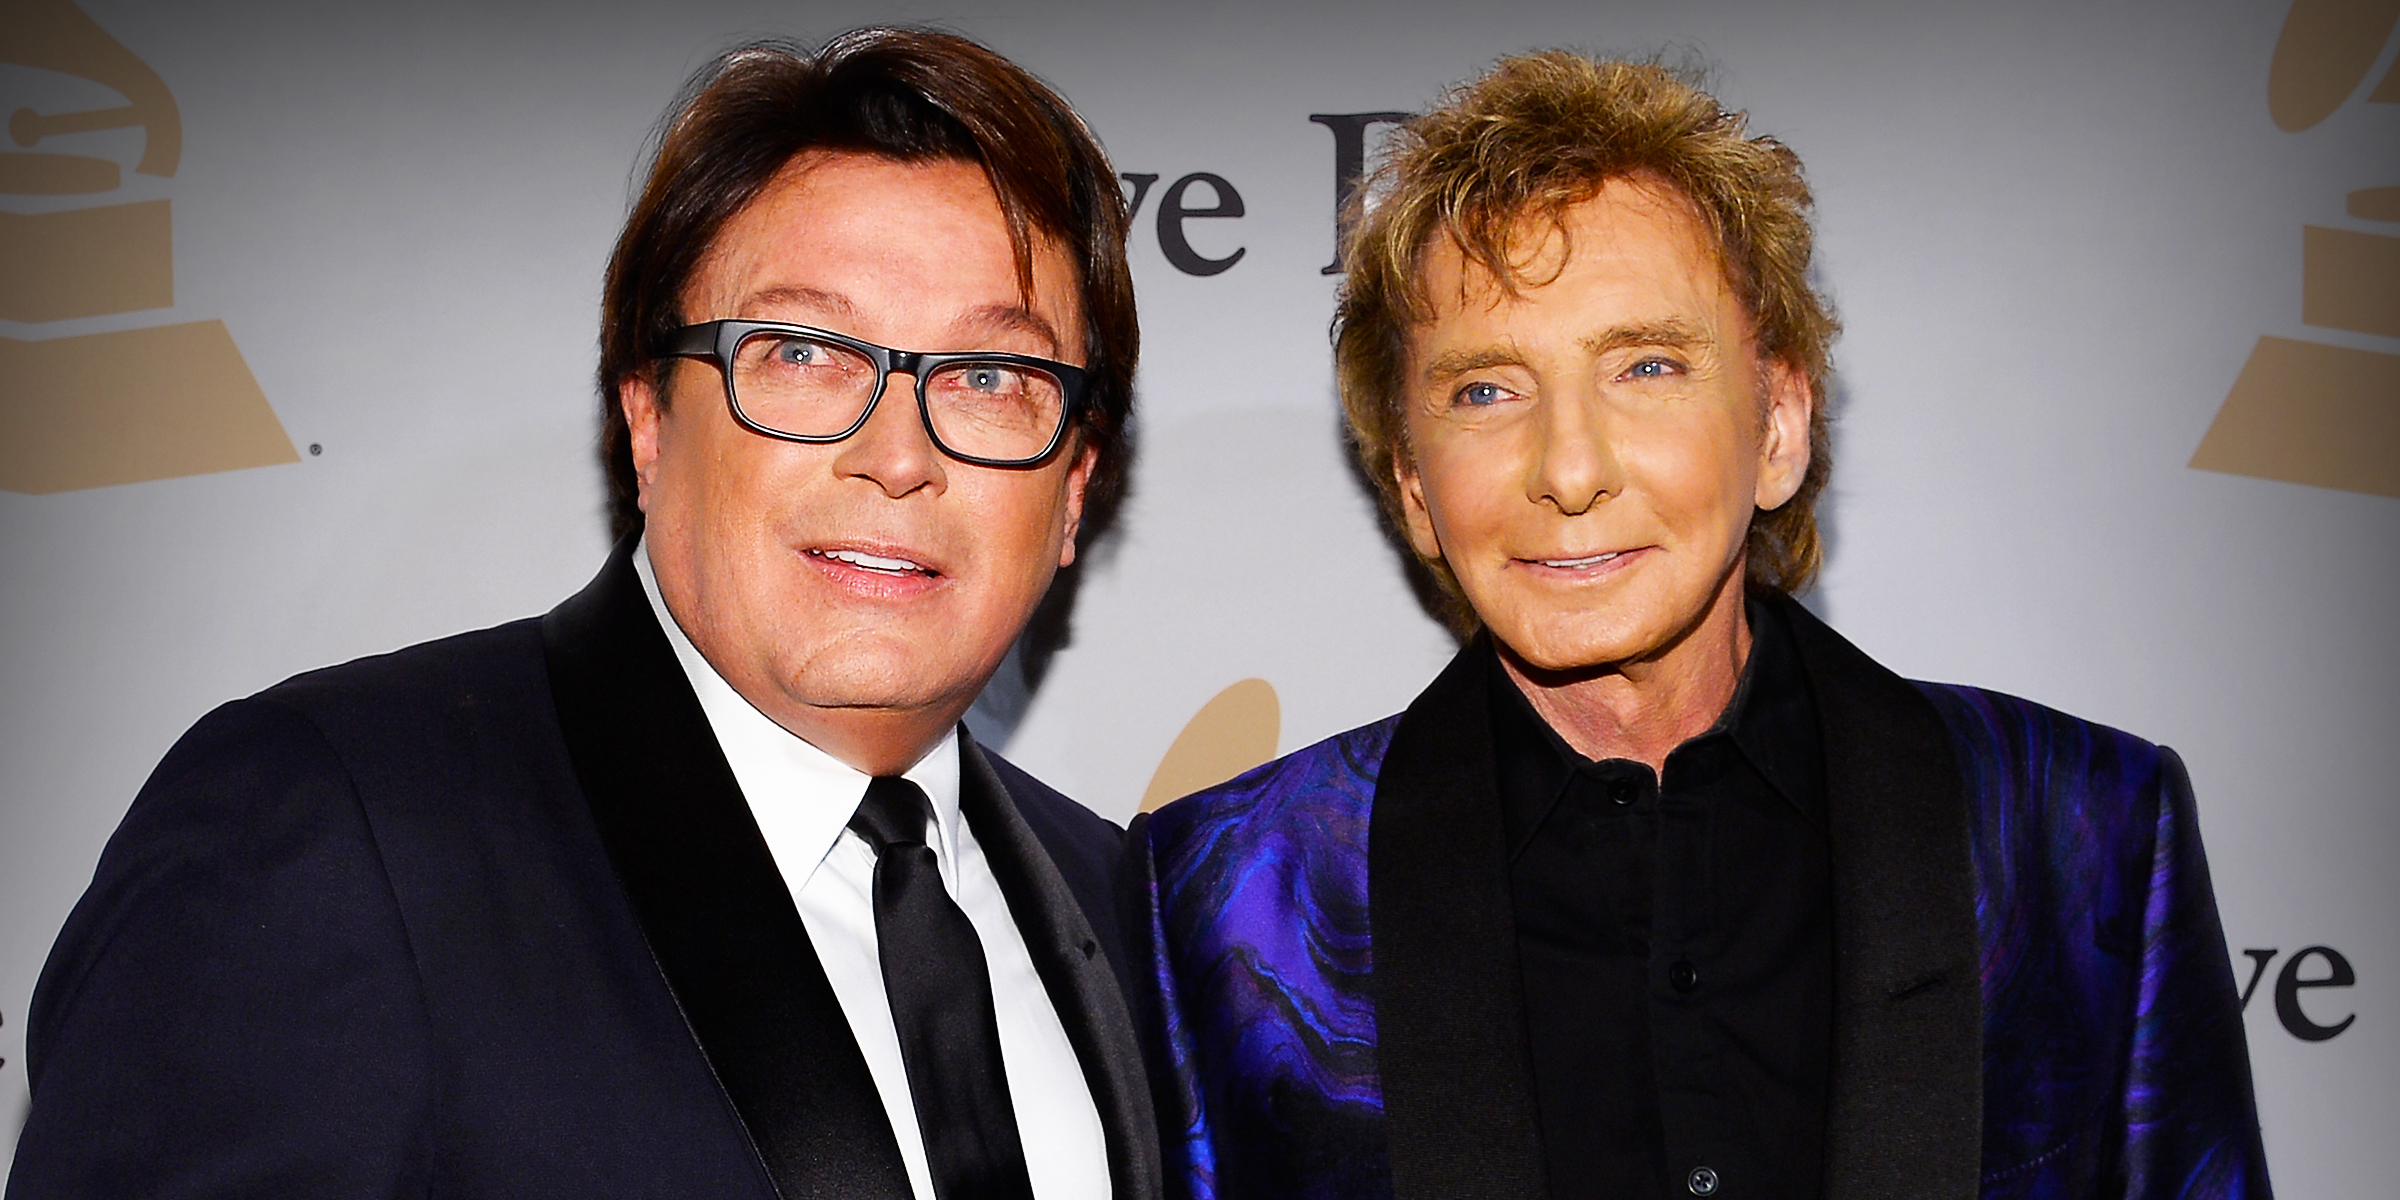 Garry Kief and Barry Manilow | Source: Getty Images